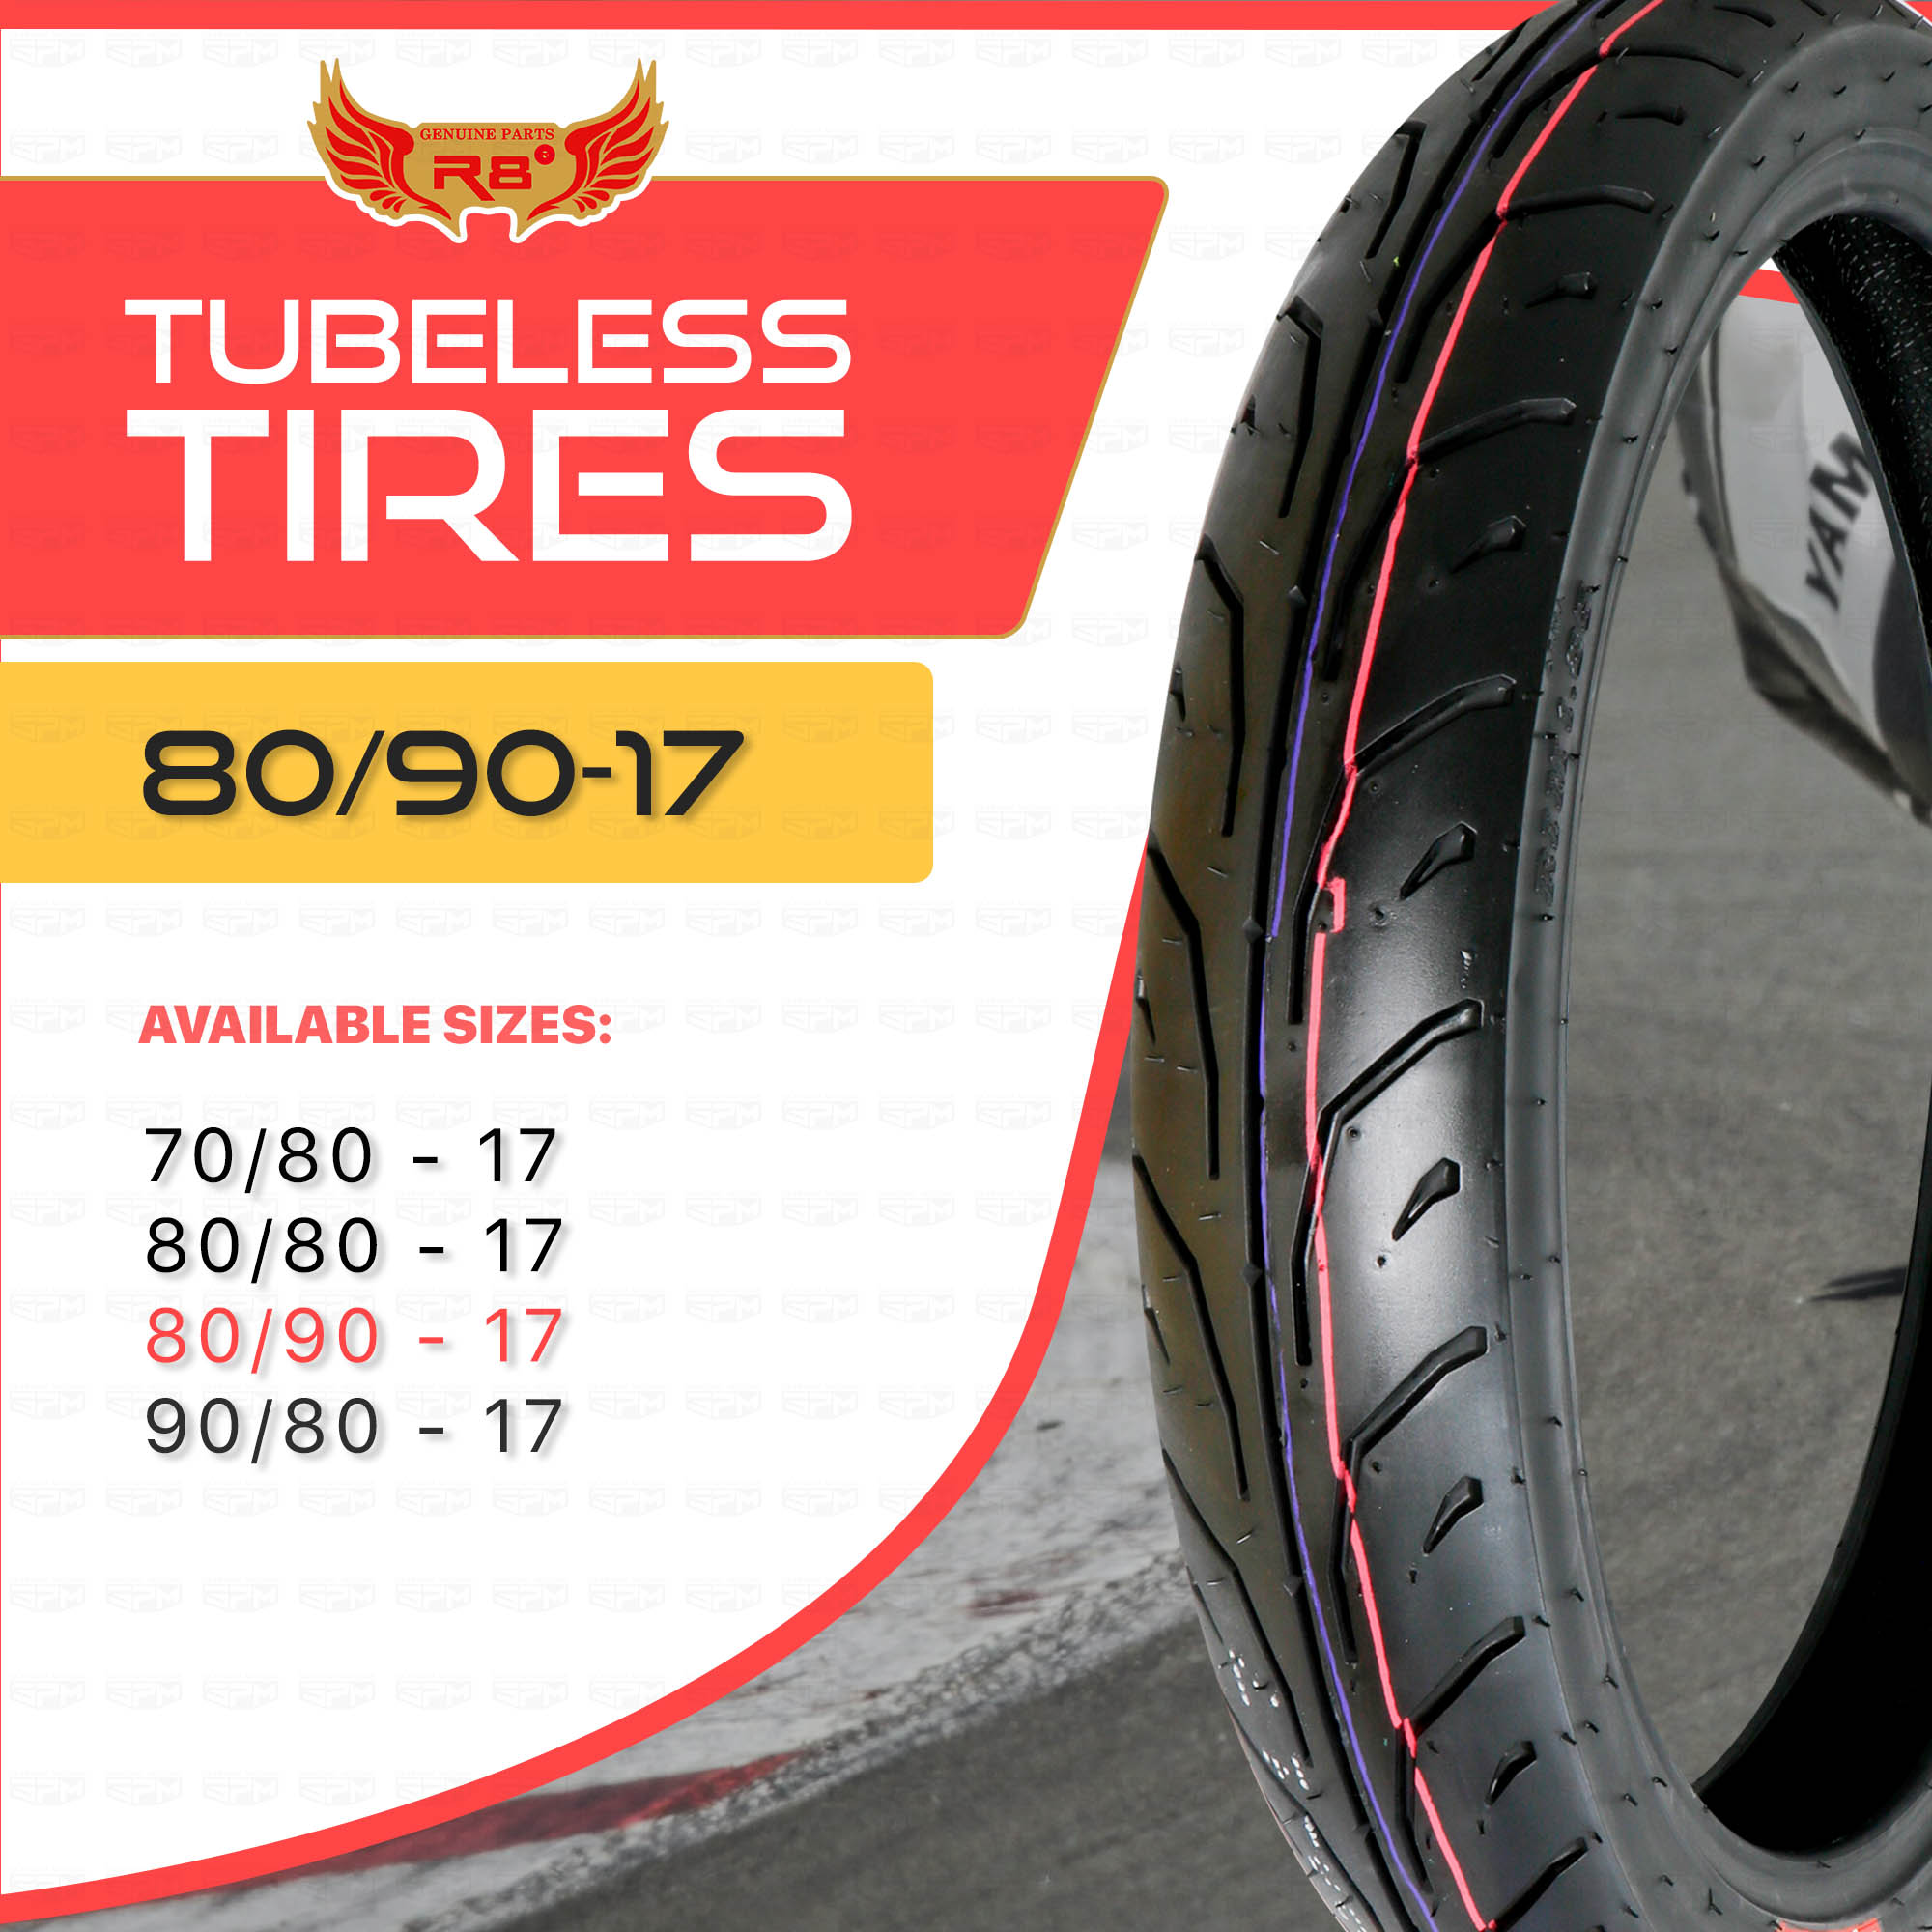 Motorcycle Tire 1x70x14 Shop Motorcycle Tire 1x70x14 With Great Discounts And Prices Online Lazada Philippines